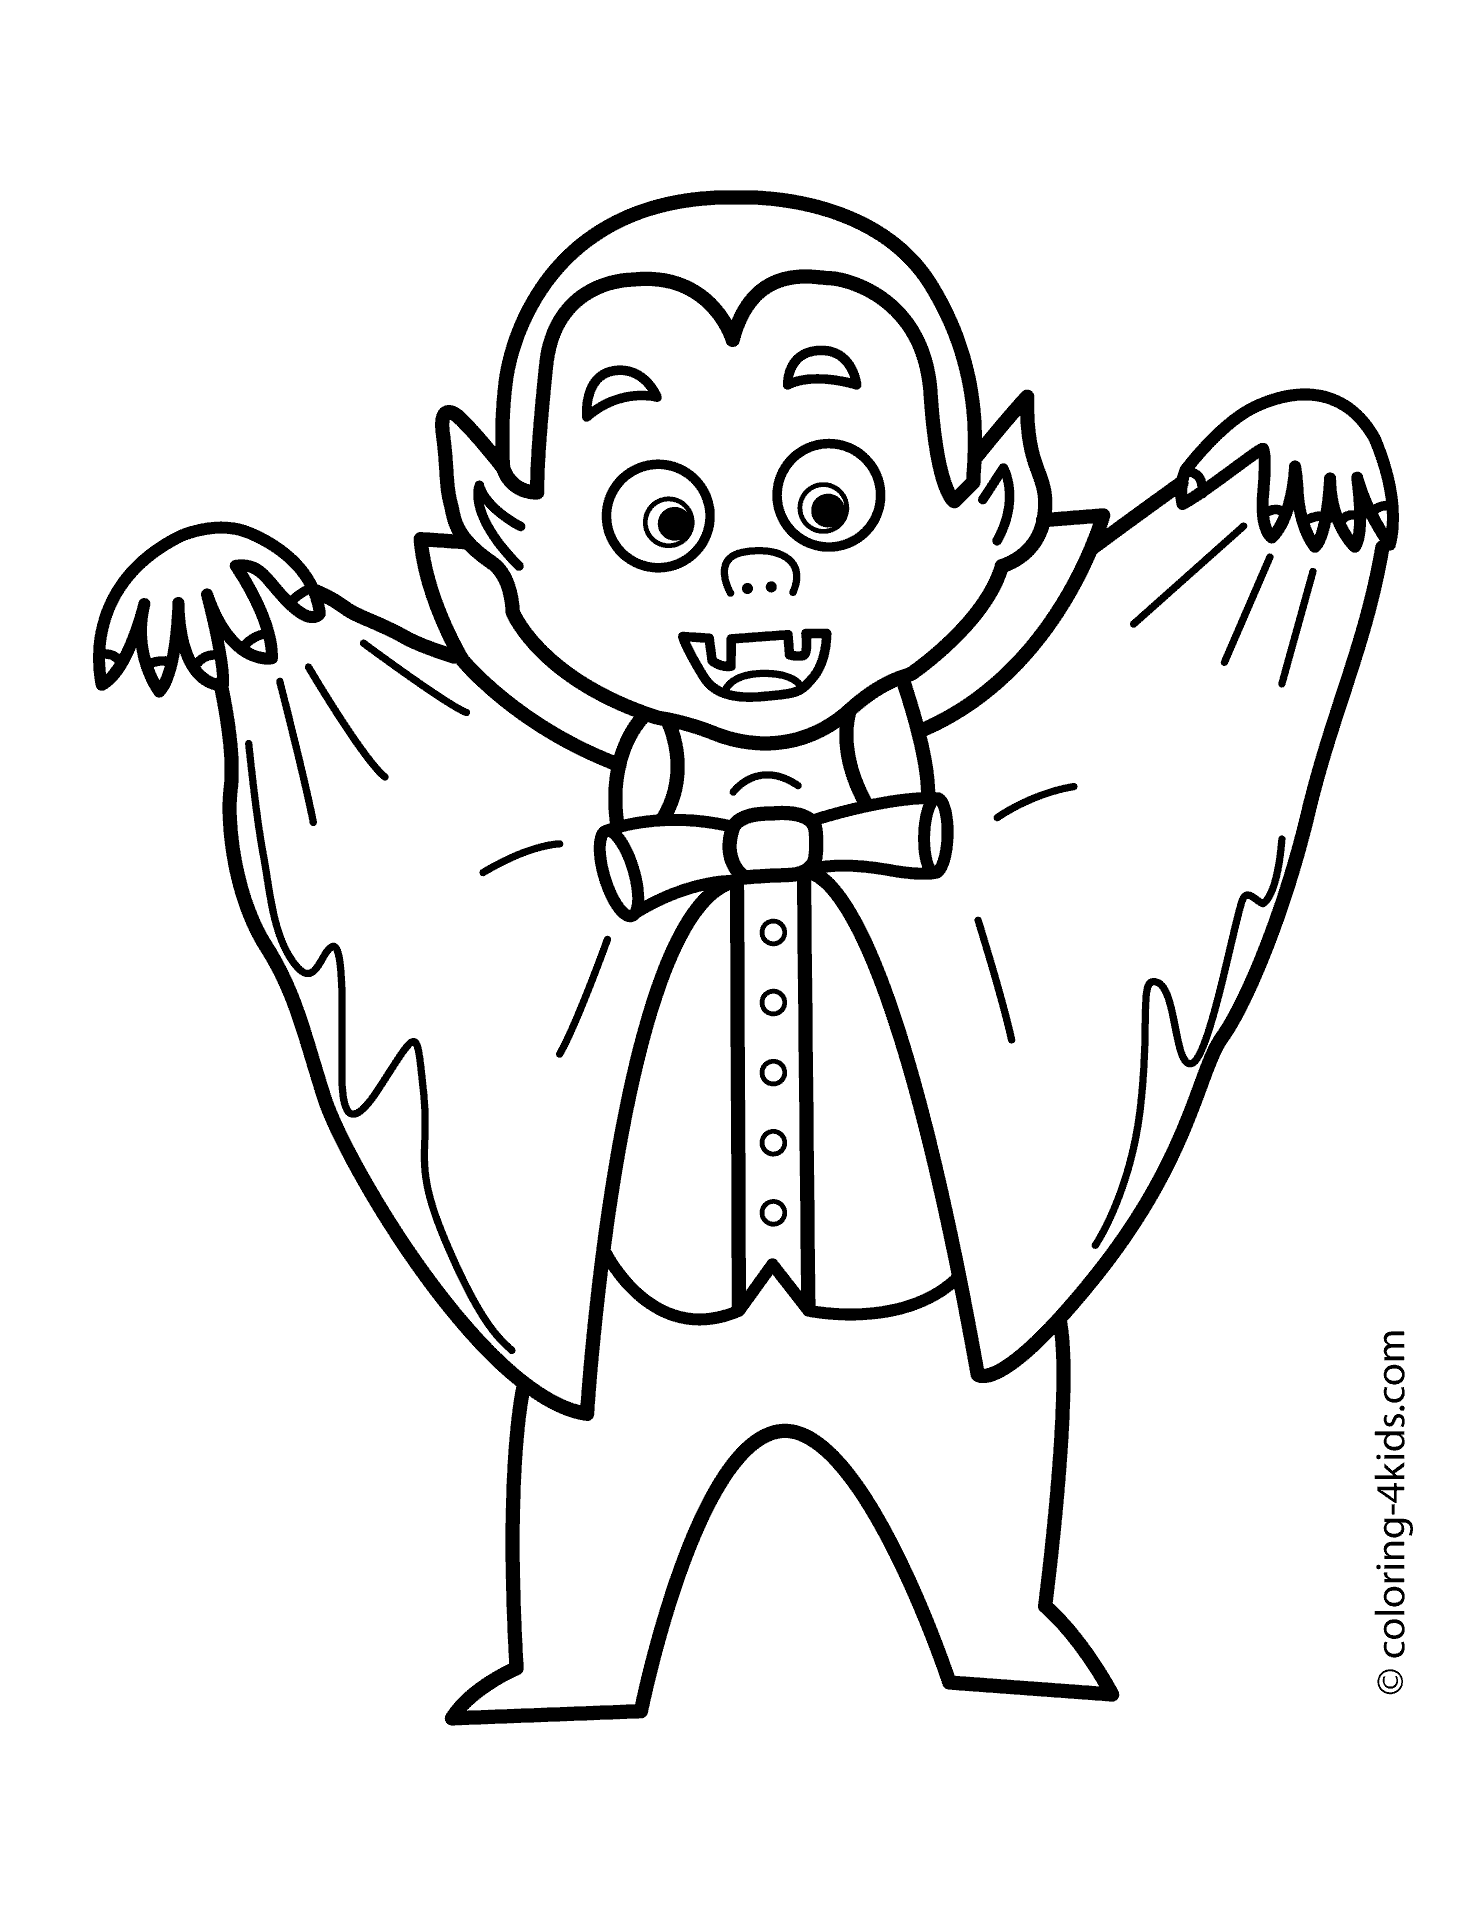 Baby Vampire Coloring Pages - Coloring Pages For All Ages